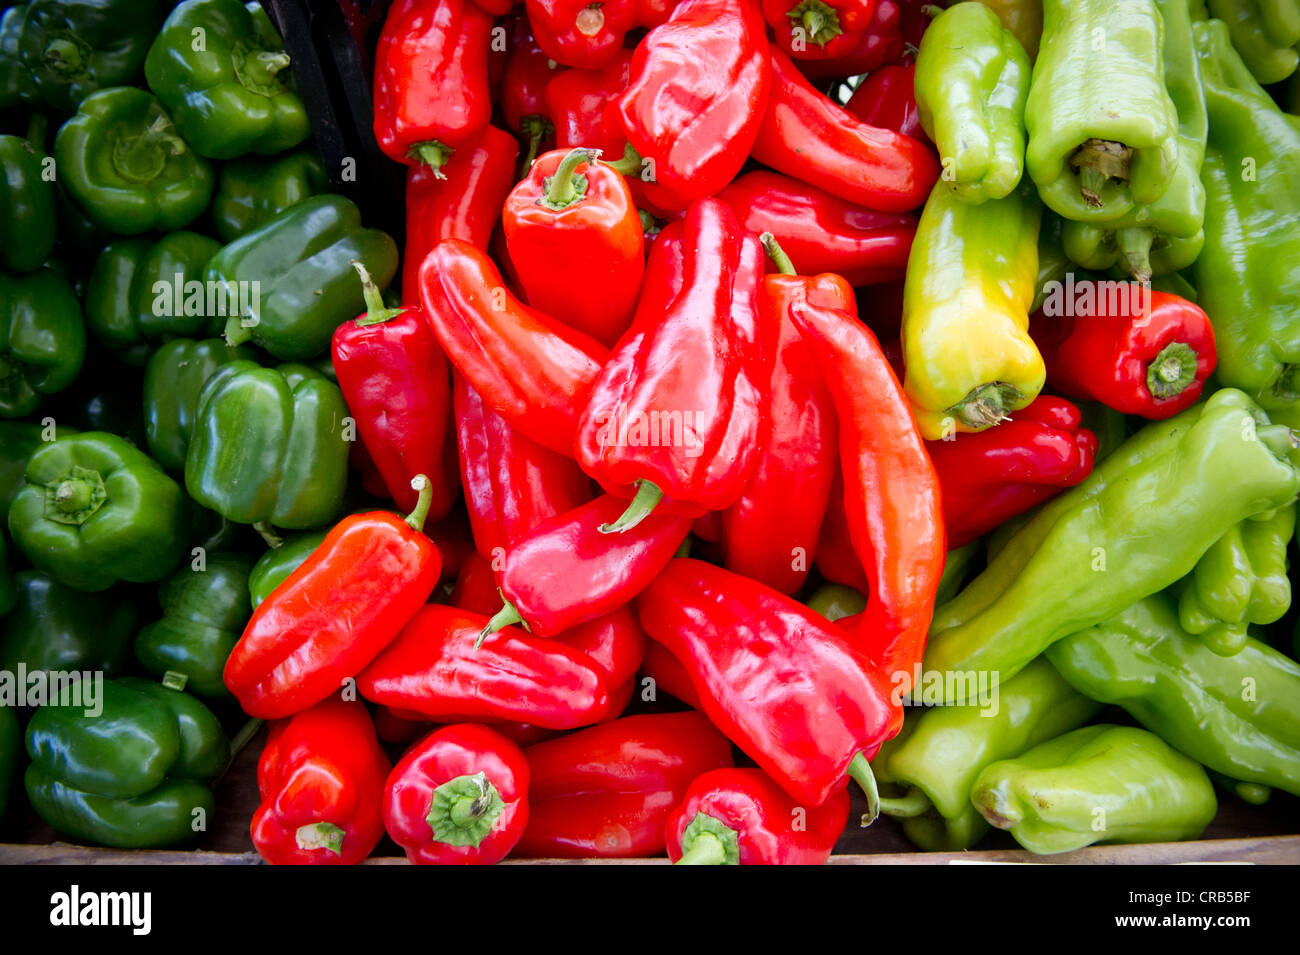 red and green peppers at a farmers market Stock Photo